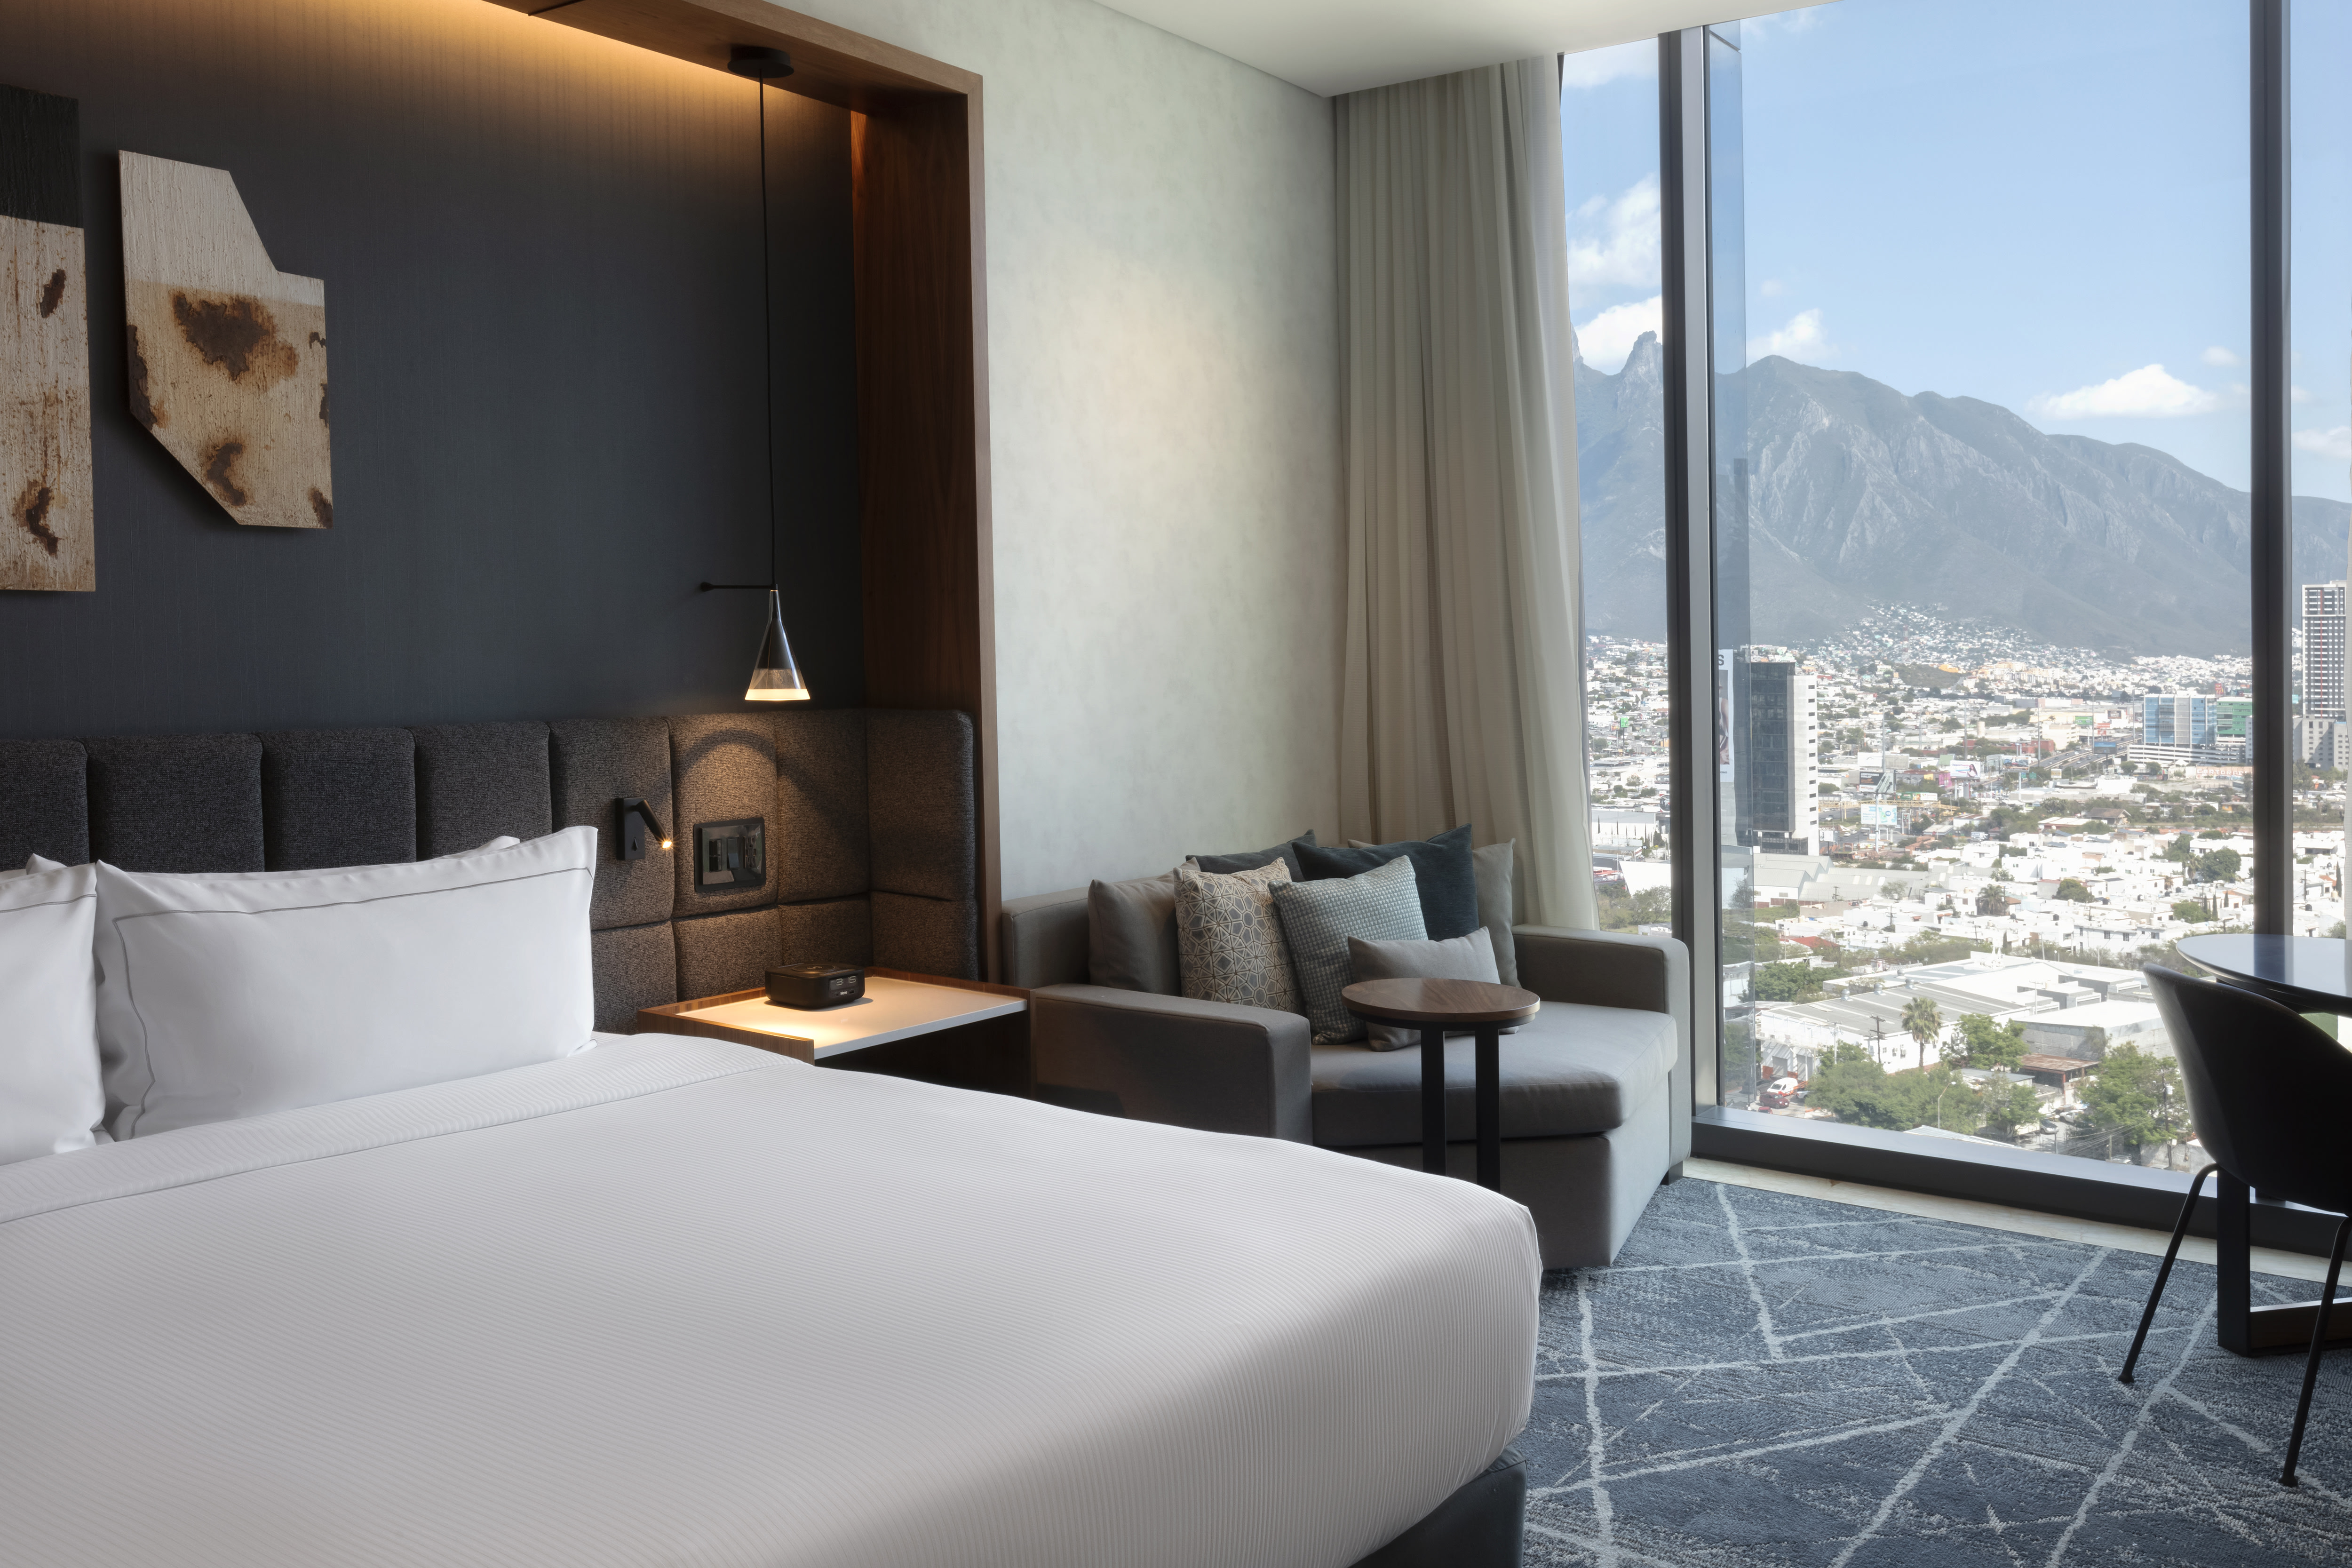 Guest room with king-sized bed, armchair and floor-to-ceiling windows with views of mountains and city